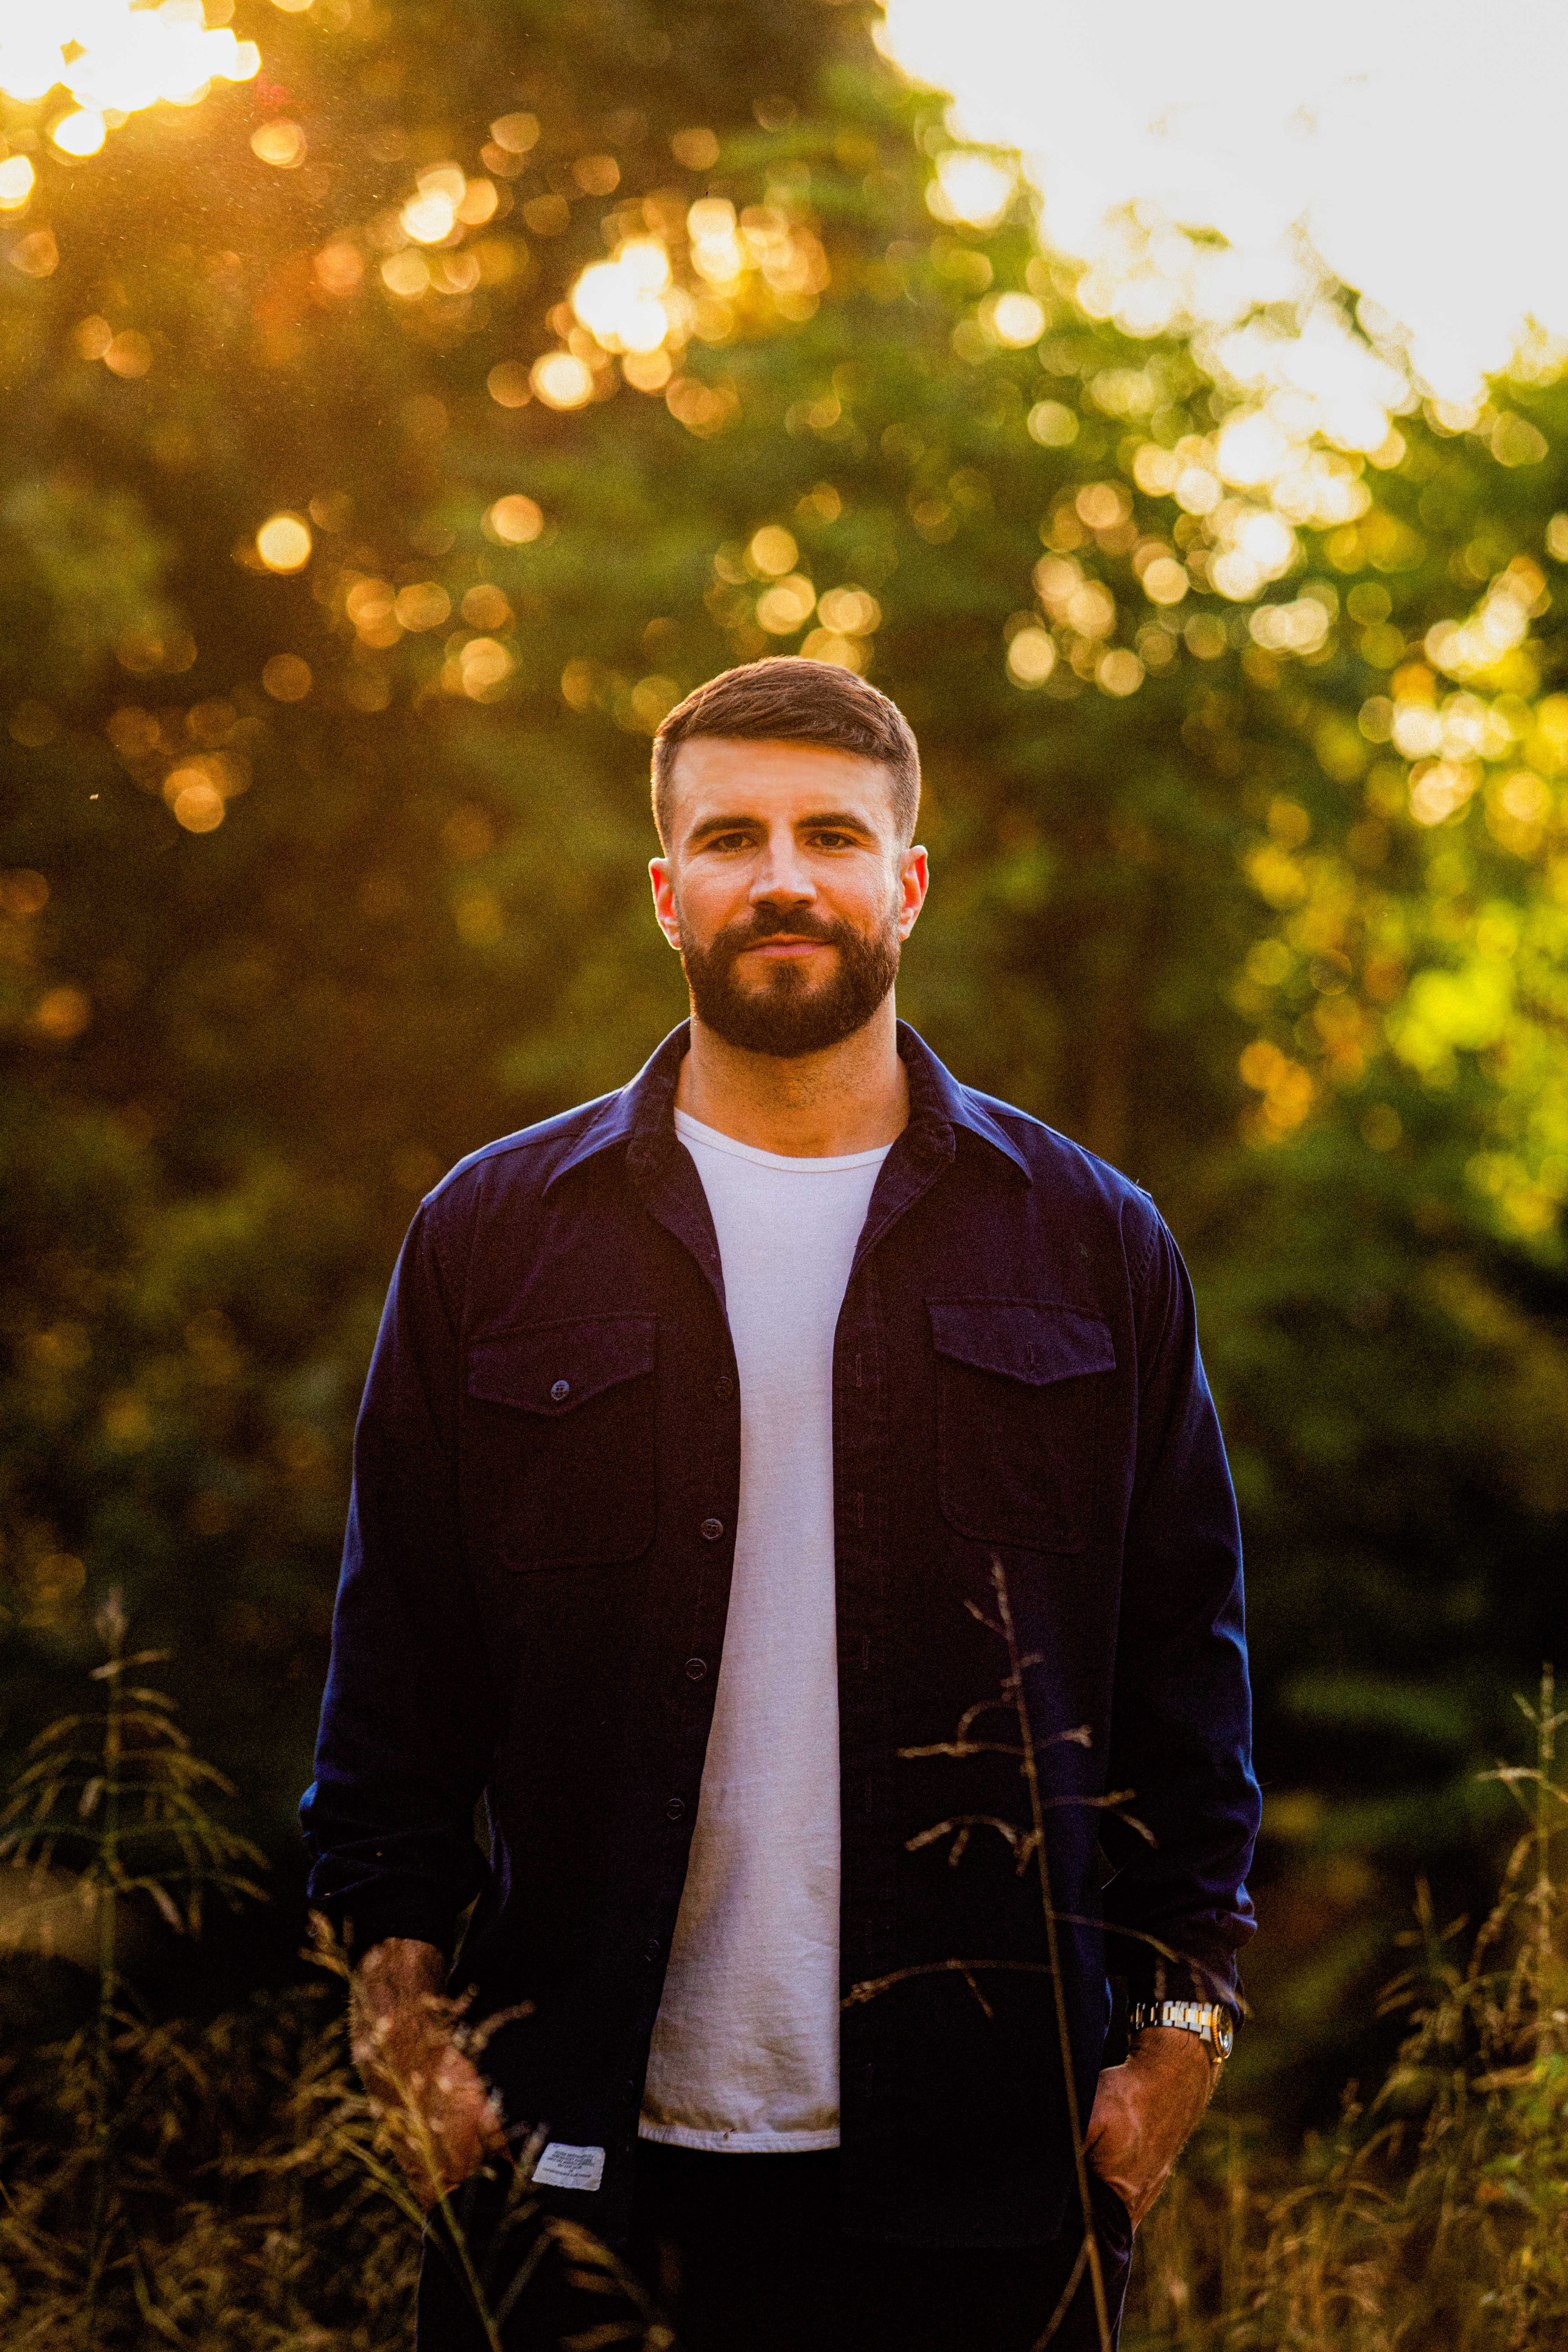 New Music Friday: Sam Hunt’s “Hard to Forget,” The Cadillac Three’s “Country Fuzz” & More